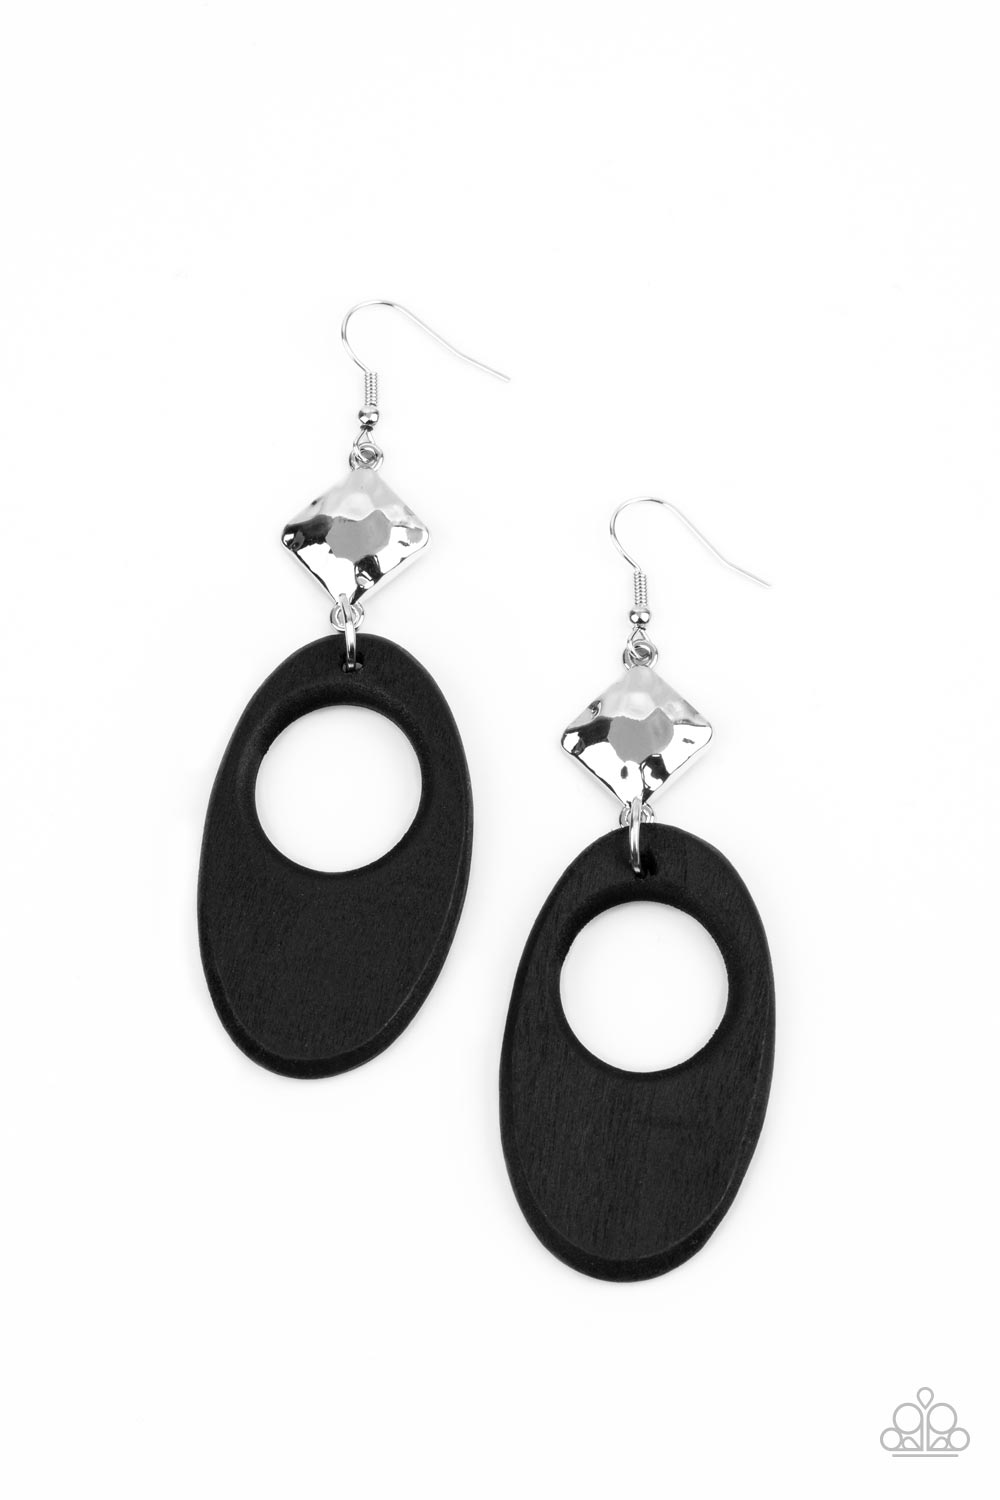 Retro Reveal - Black Wood - Silver Earrings - Paparazzi Accessories - Black wooden oval frame swings from the bottom of a hammered silver frame, creating a retro lure. Earring attaches to a standard fishhook fitting.